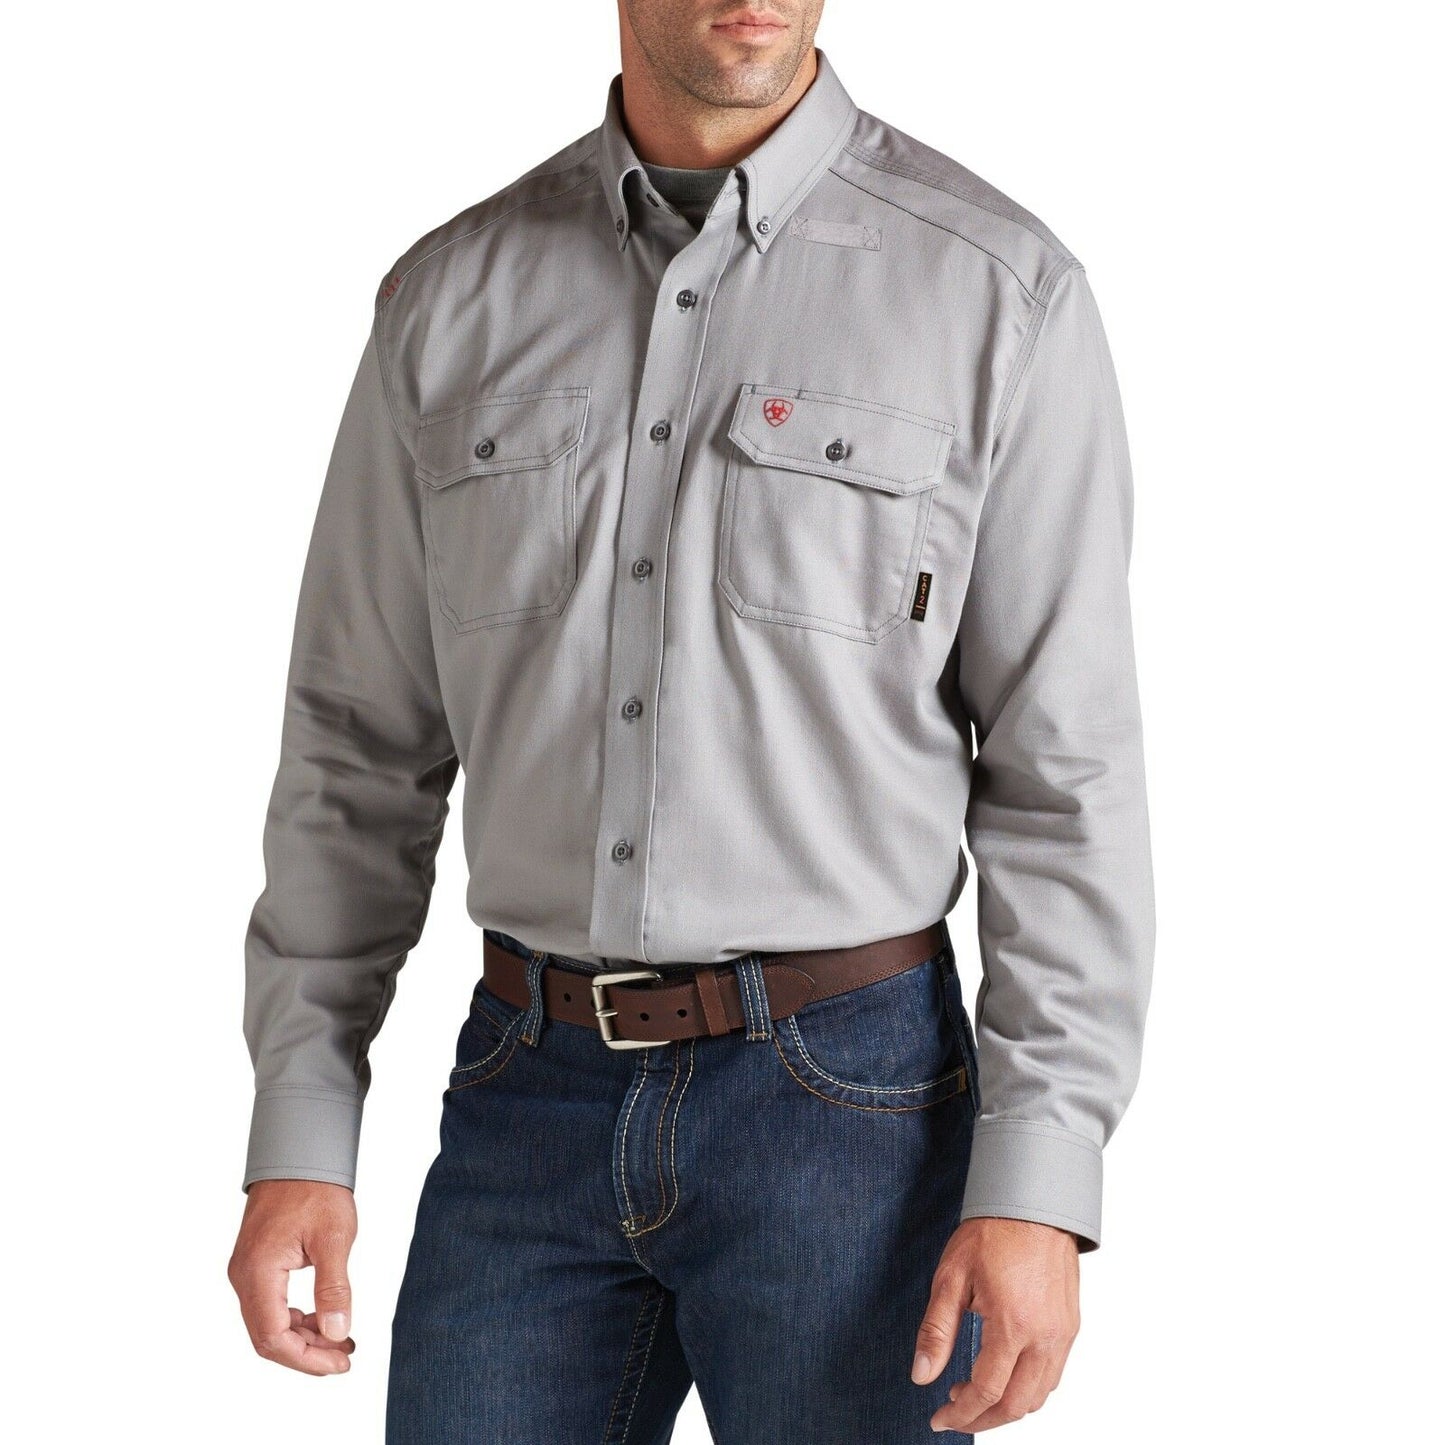 Ariat® Men's FR Flame Resistant Solid Silver Fox Work Shirt 10012253